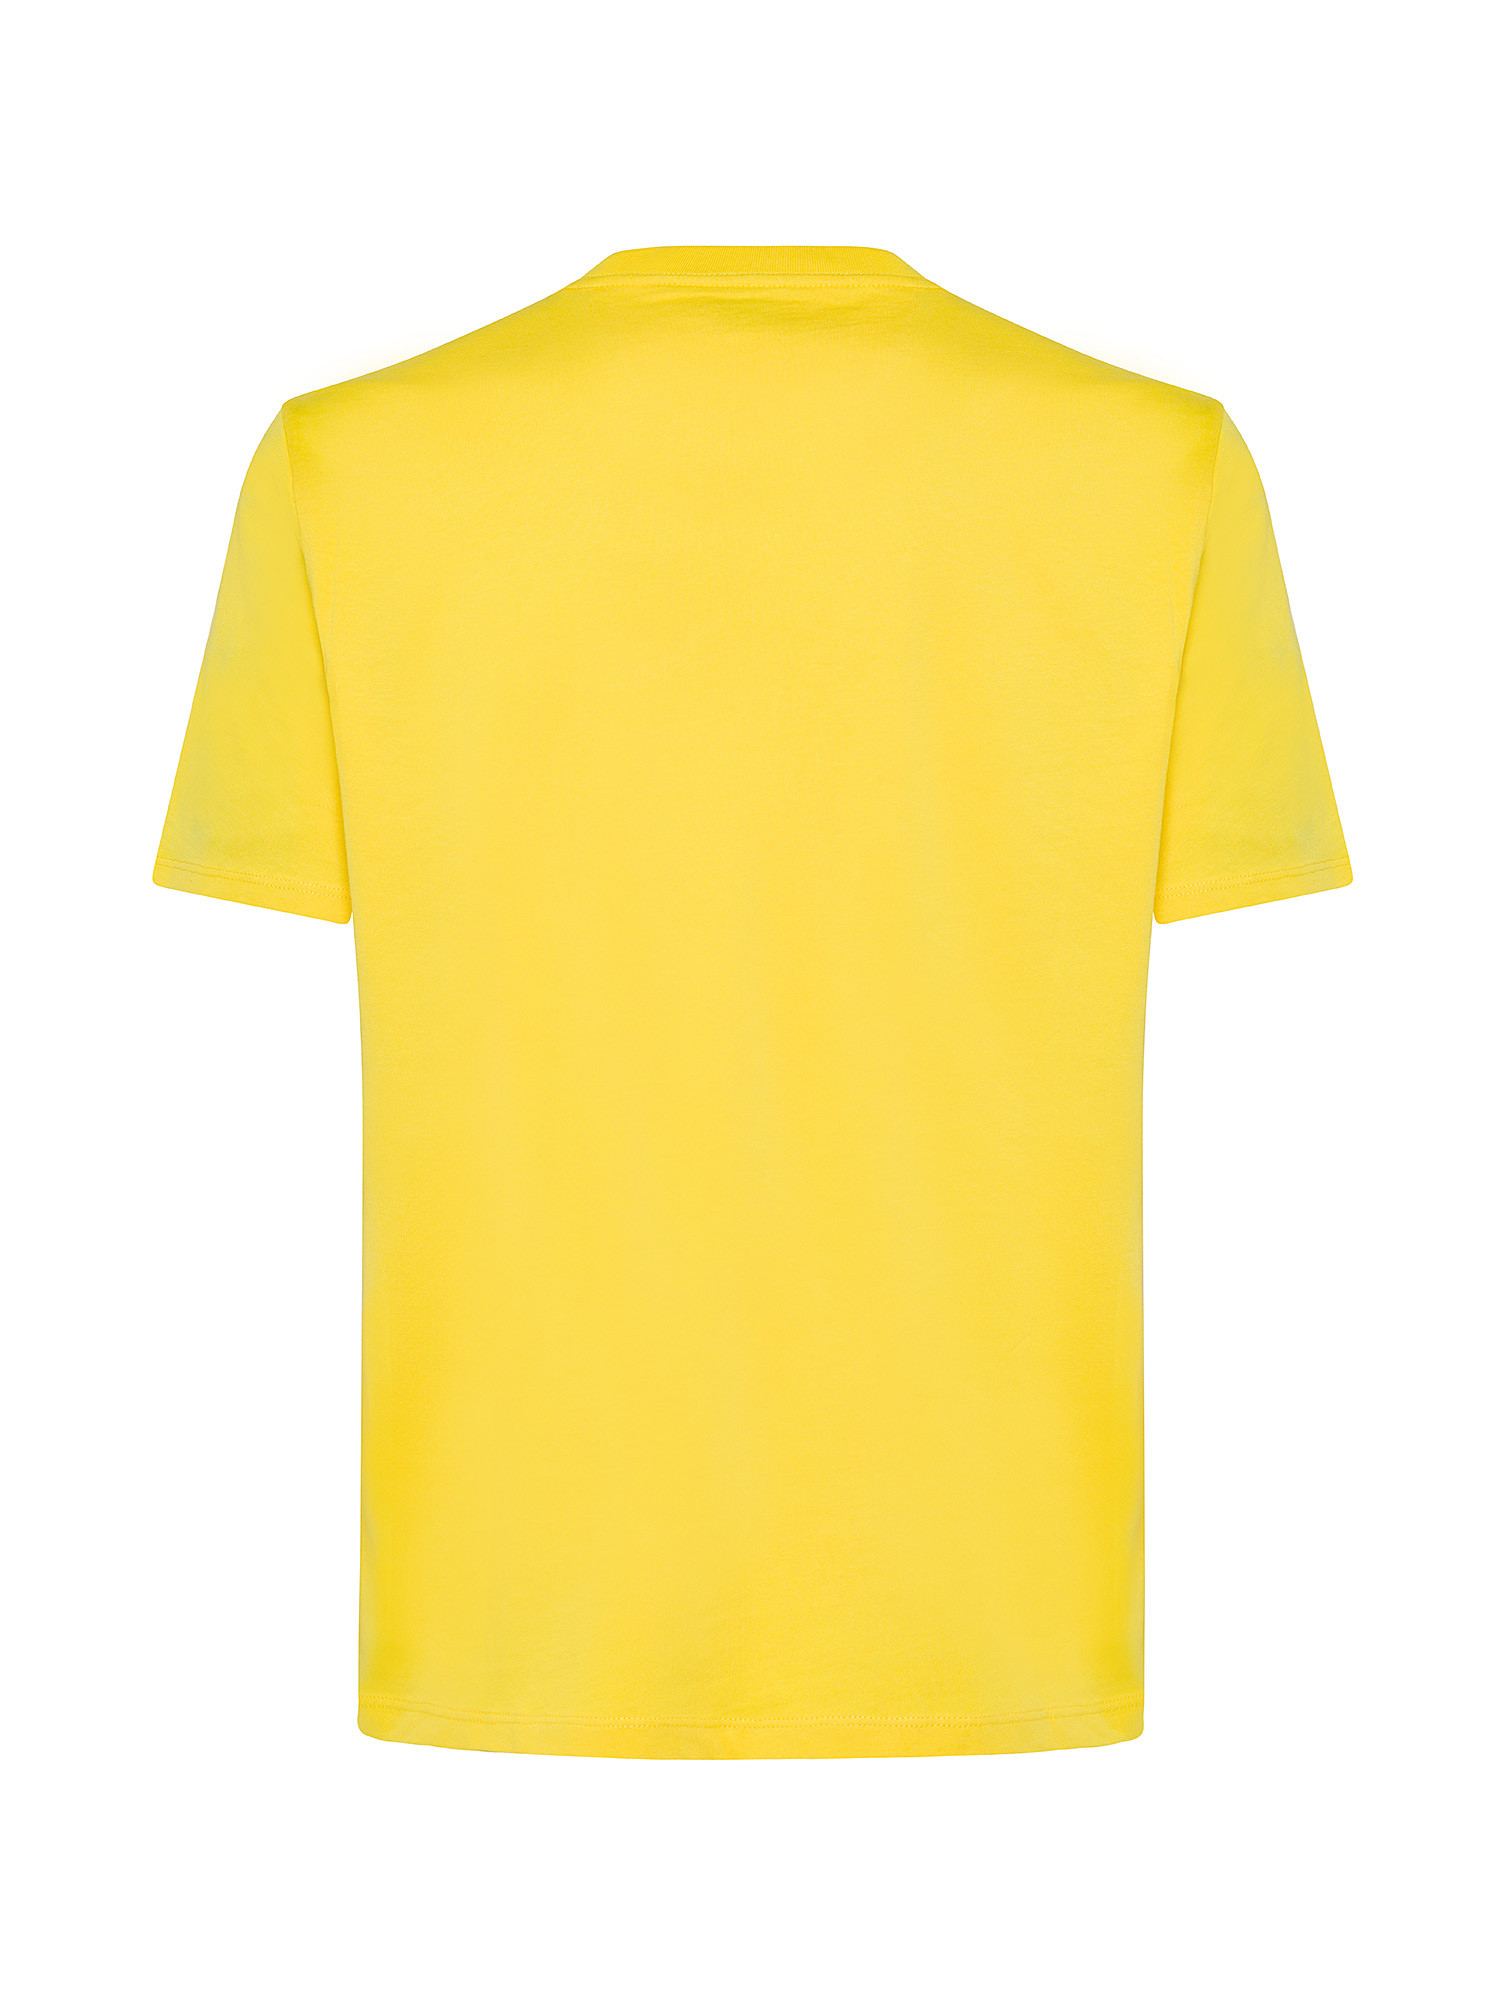 JCT - T-shirt in puro cotone supima, Giallo limone, large image number 1